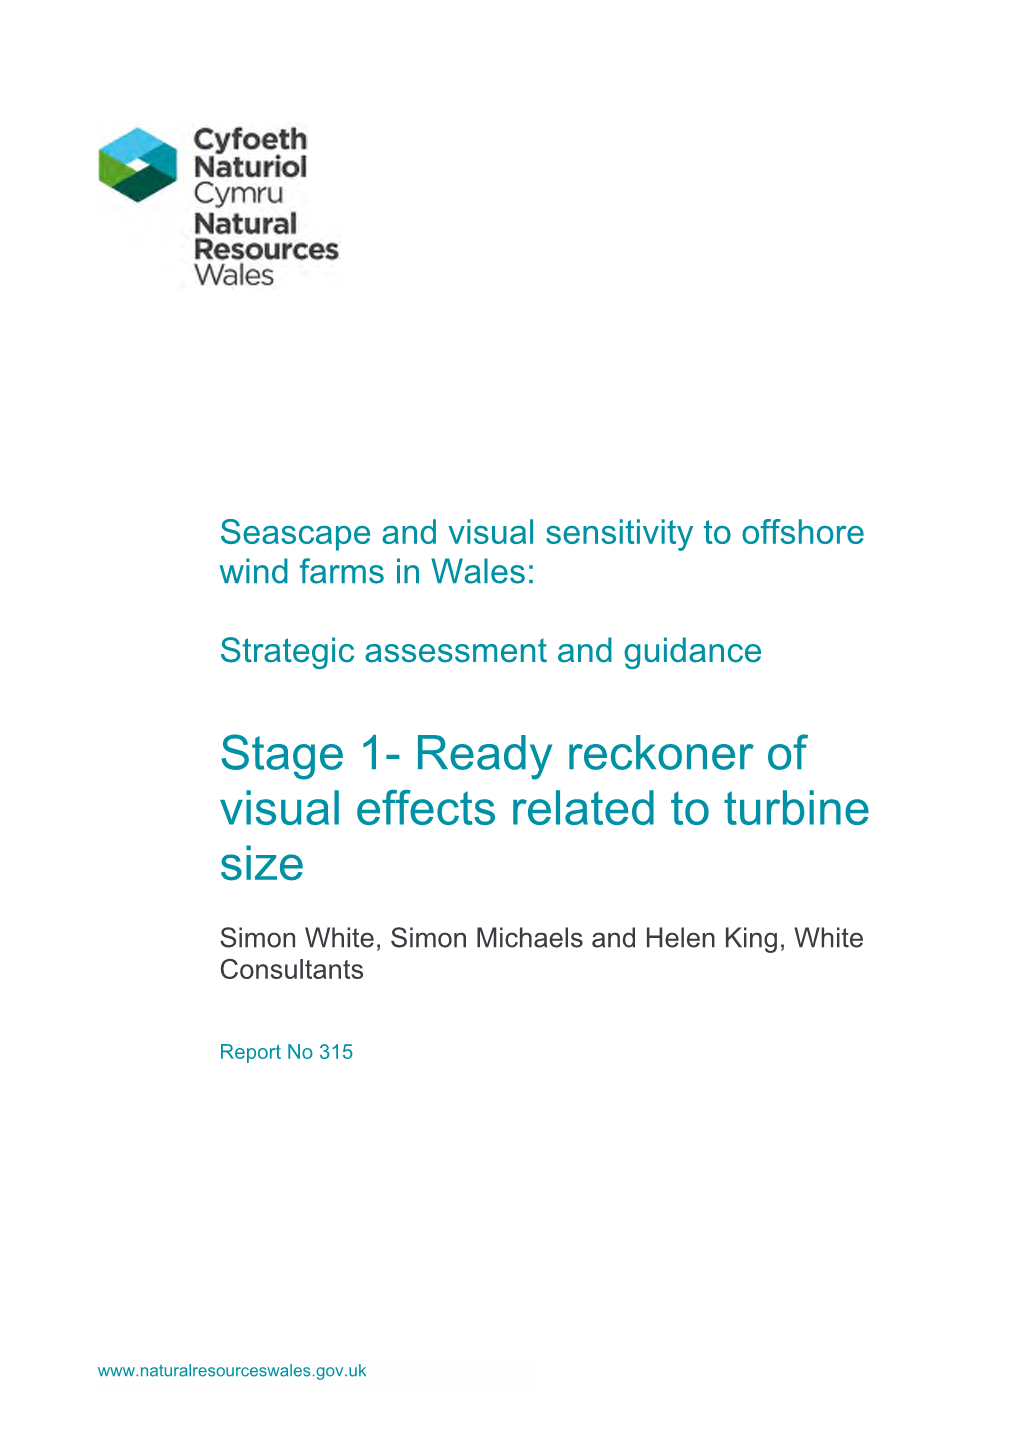 Stage 1- Ready Reckoner of Visual Effects Related to Turbine Size